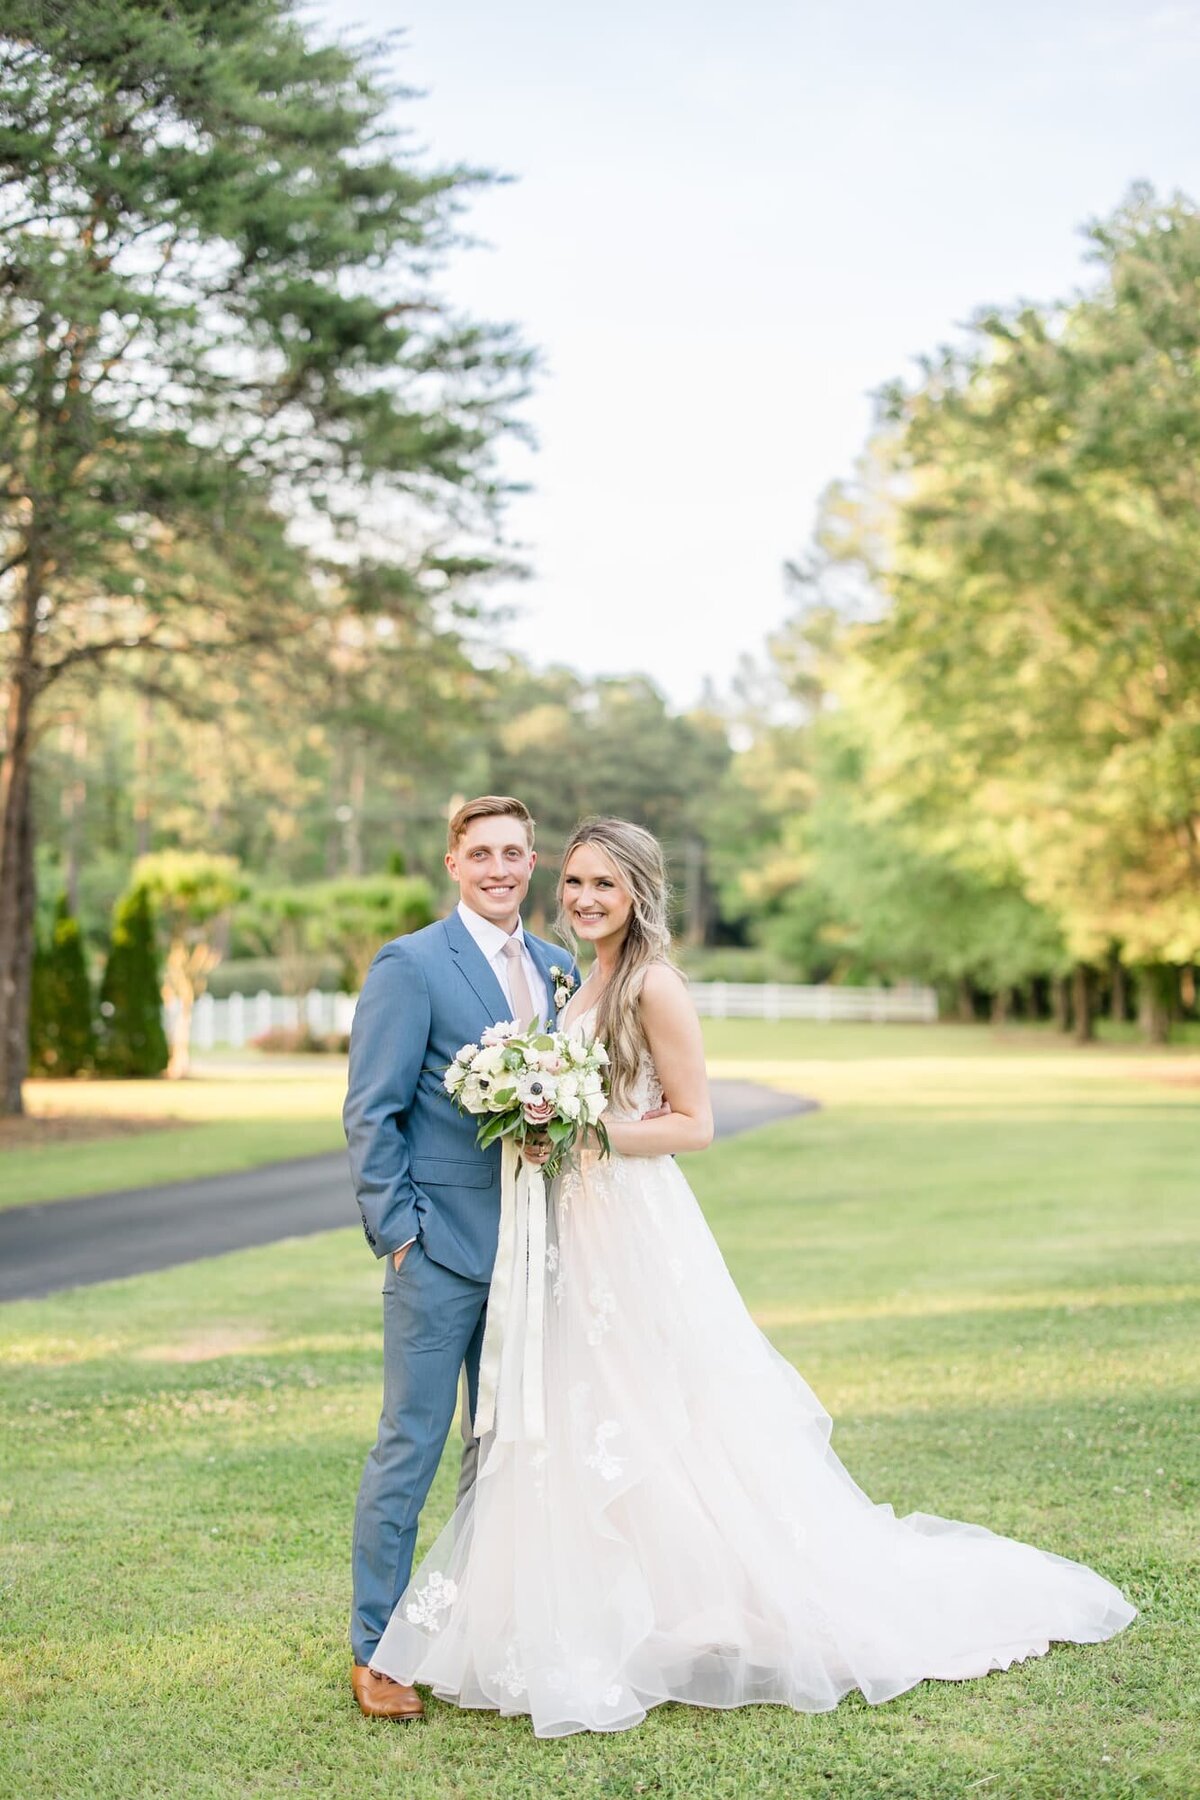 katie_and_alec_wedding_photography_wedding_videography_birmingham_alabama_husband_and_wife_team_photo_video_weddings_engagement_engagements_light_airy_focused_on_marriage_samantha_connor_sonnet_house_116